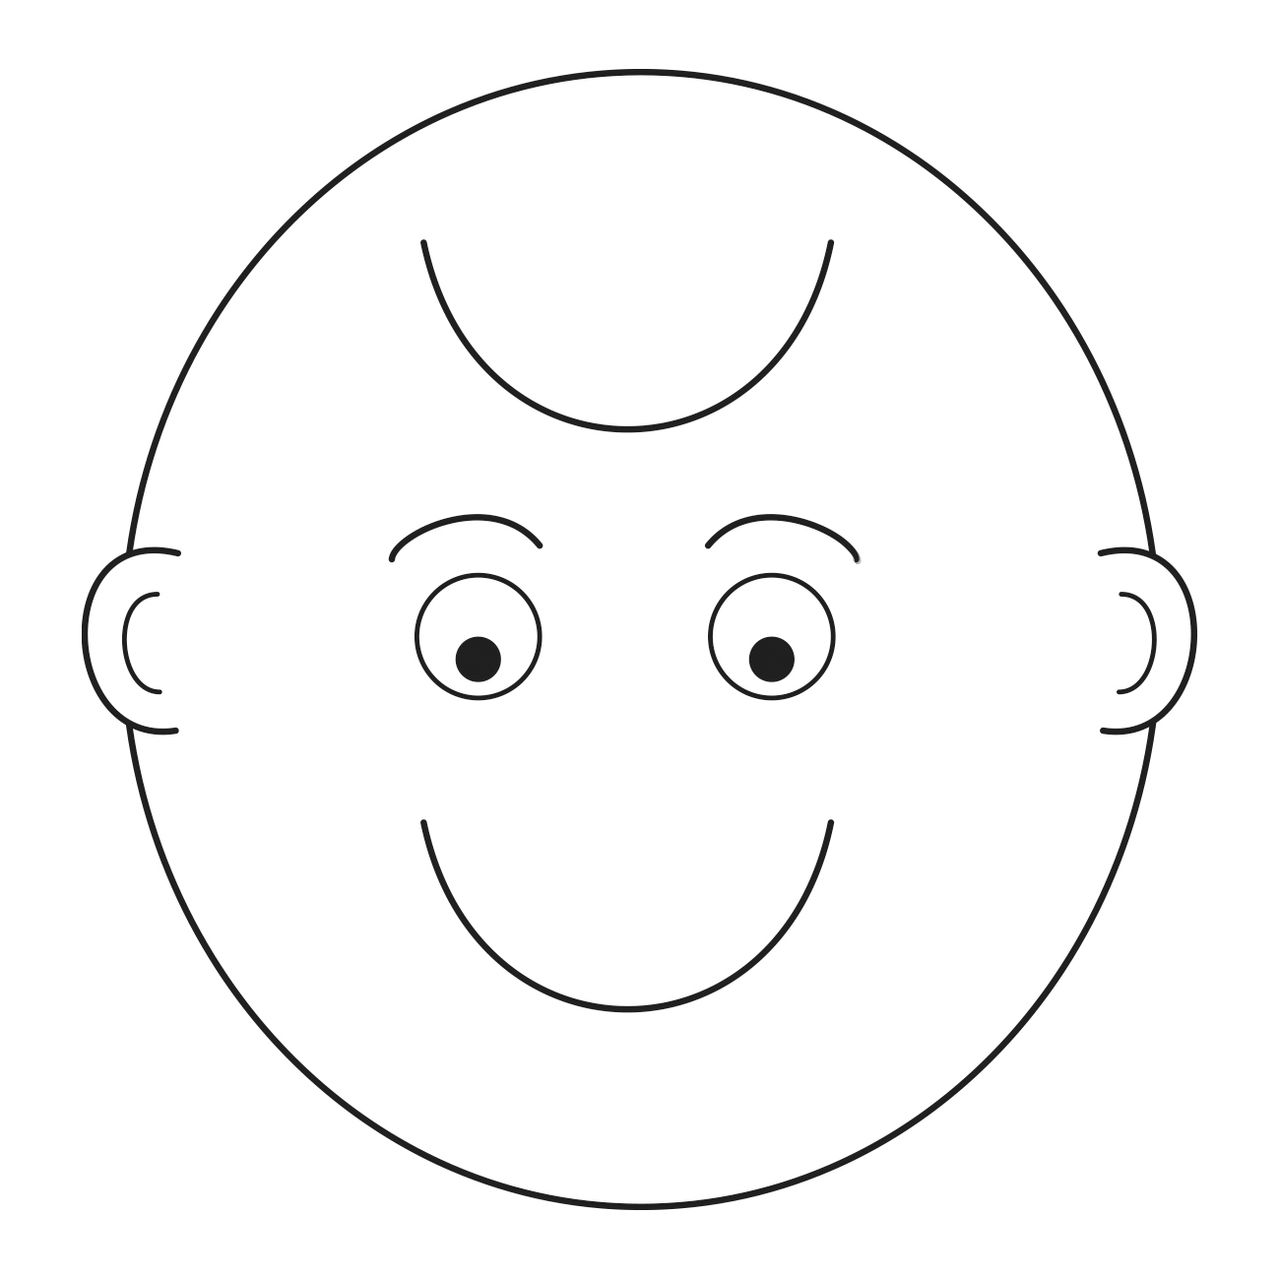 An illustration of a smiling/frowning face from the nursery manual Behold Your Little Ones (2008), page 83.